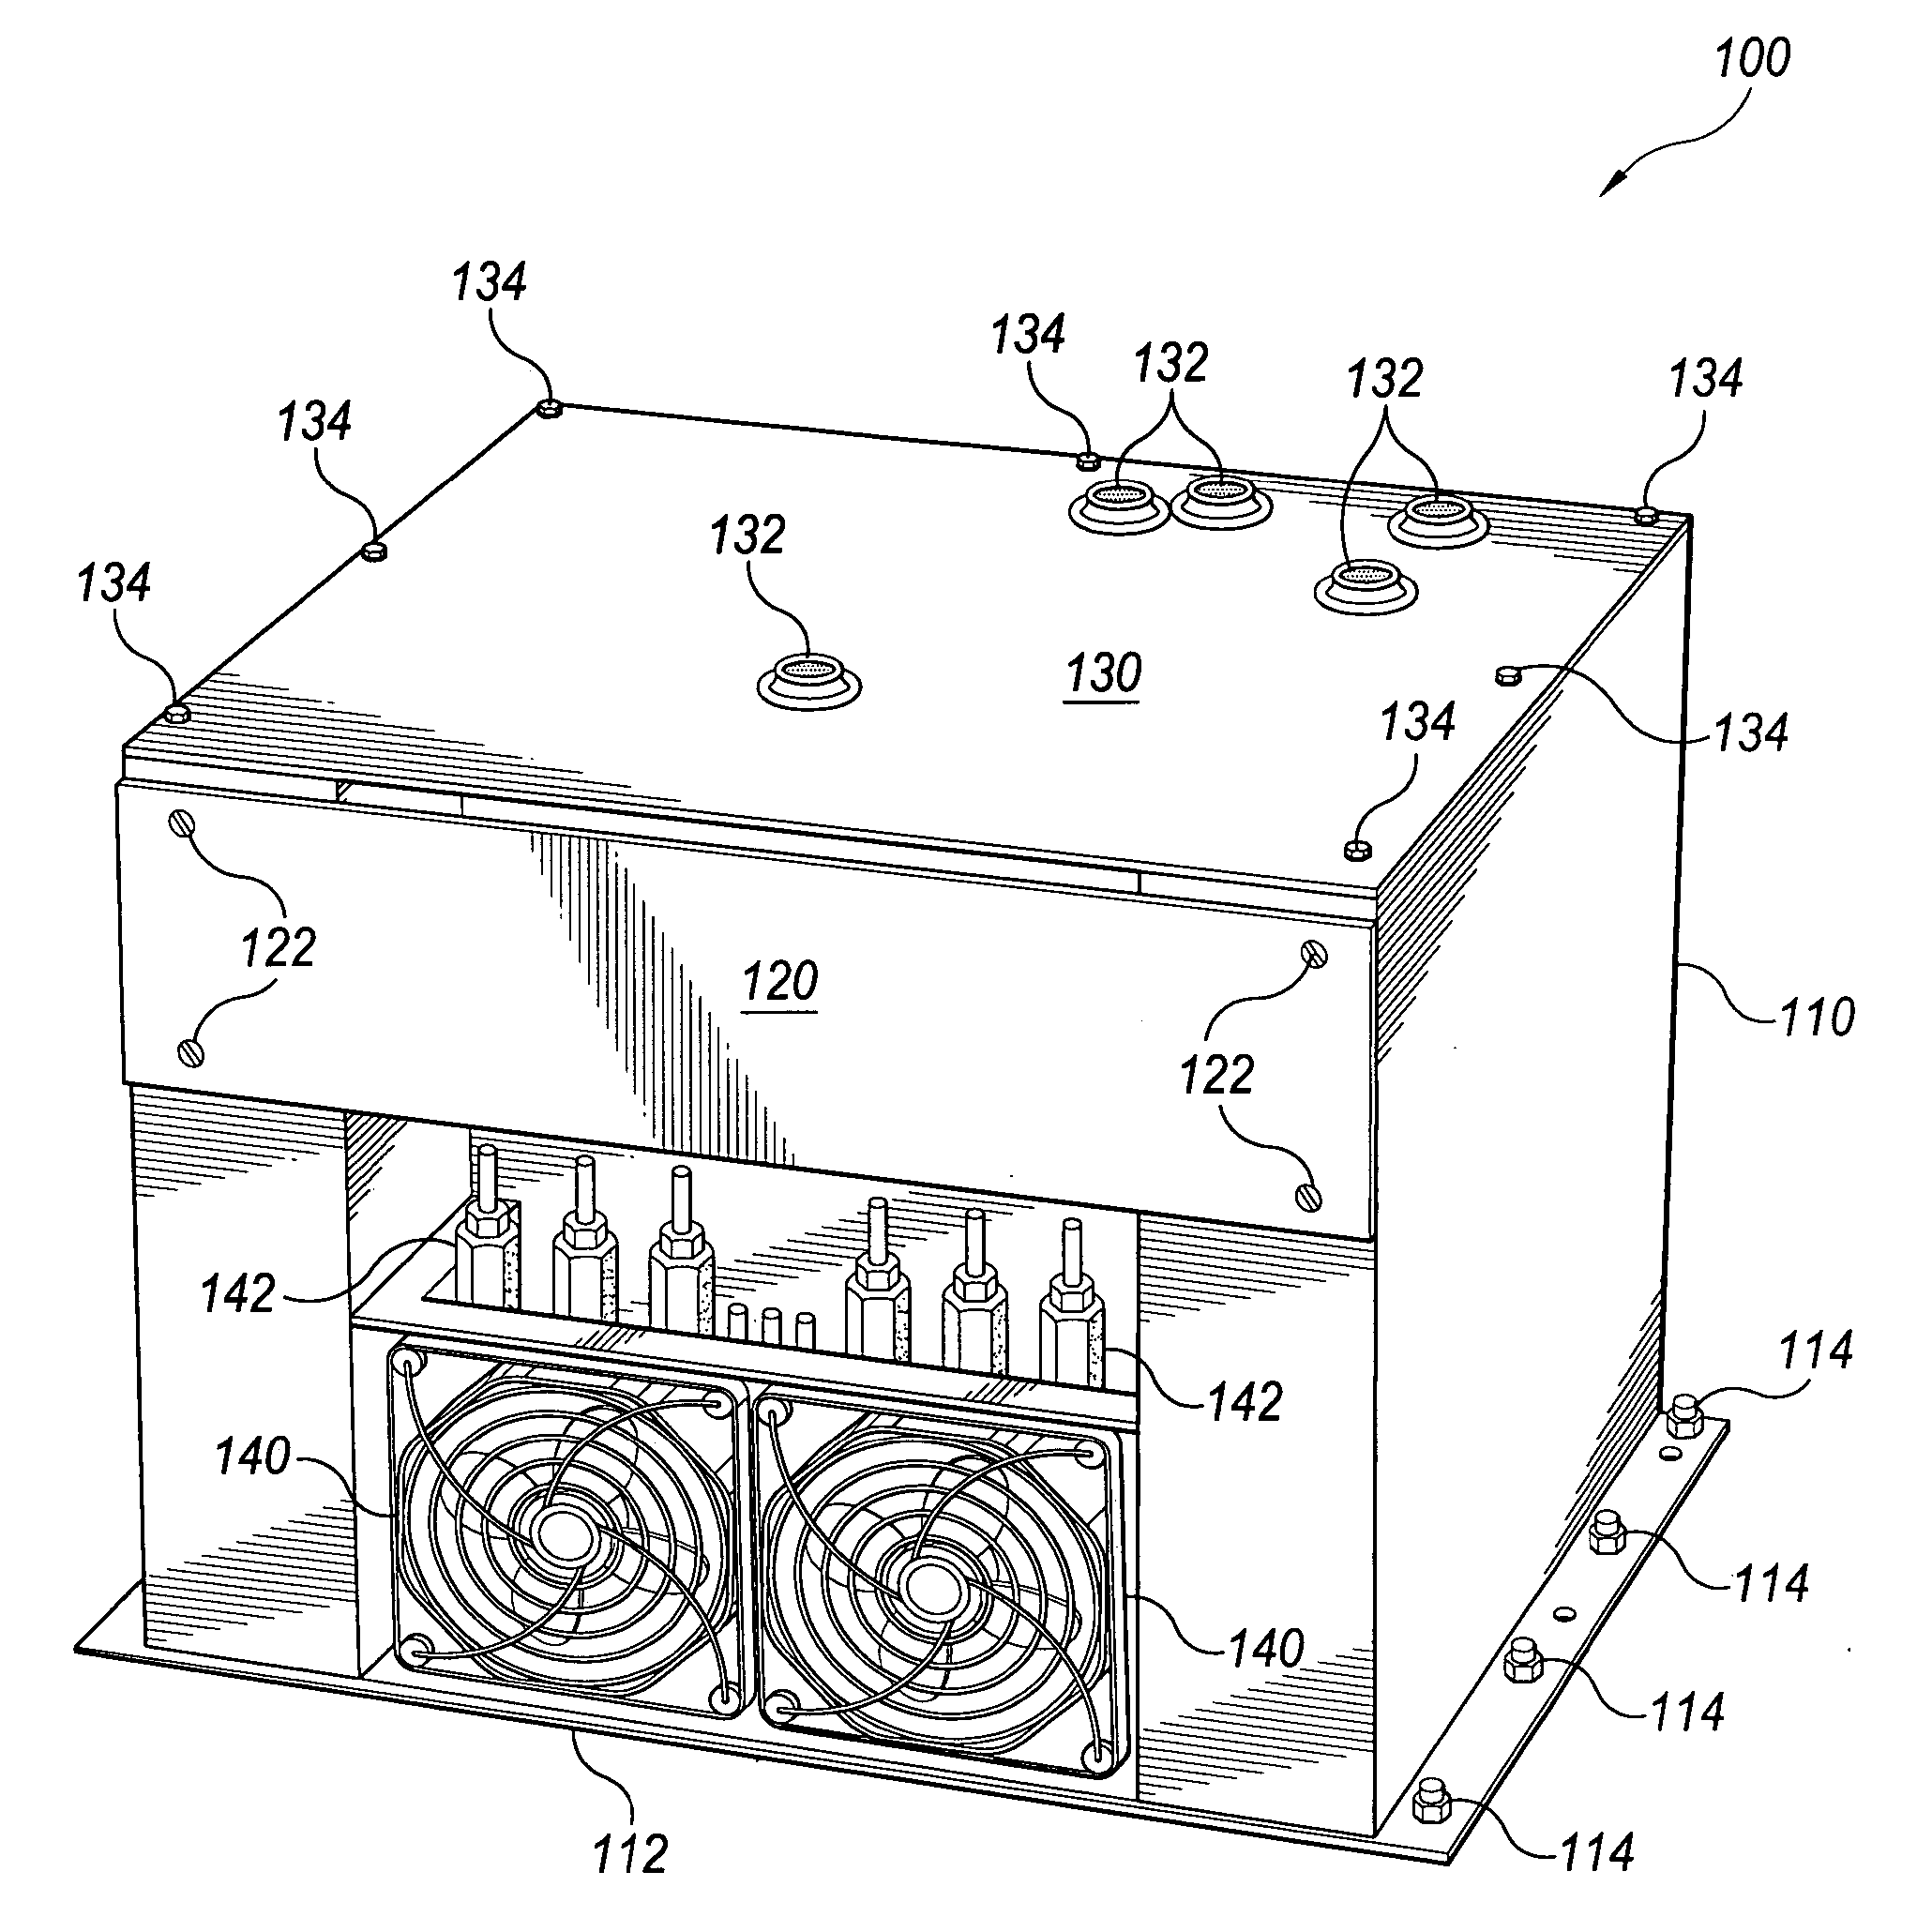 Solid-state magnet control